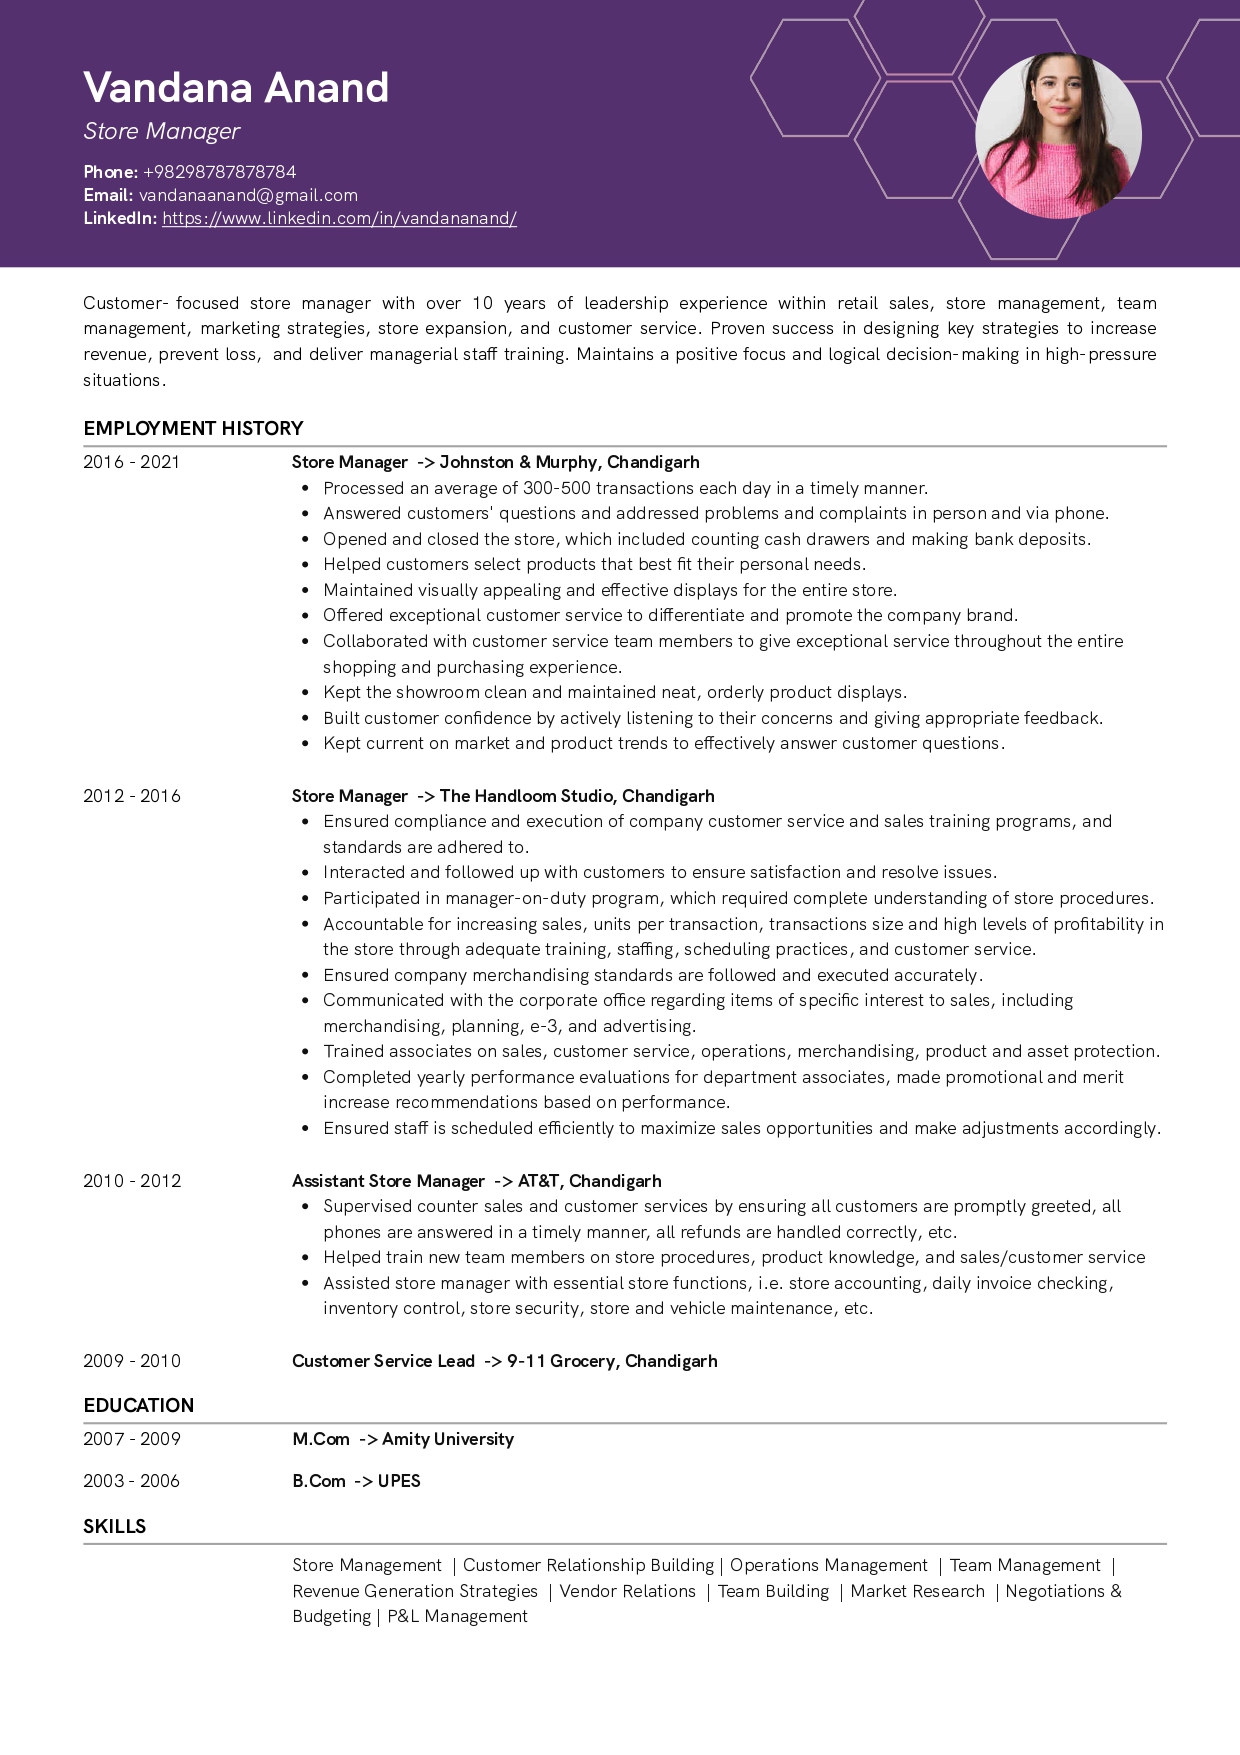 Sample Resume of Store Manager | Free Resume Templates & Samples on Resumod.co